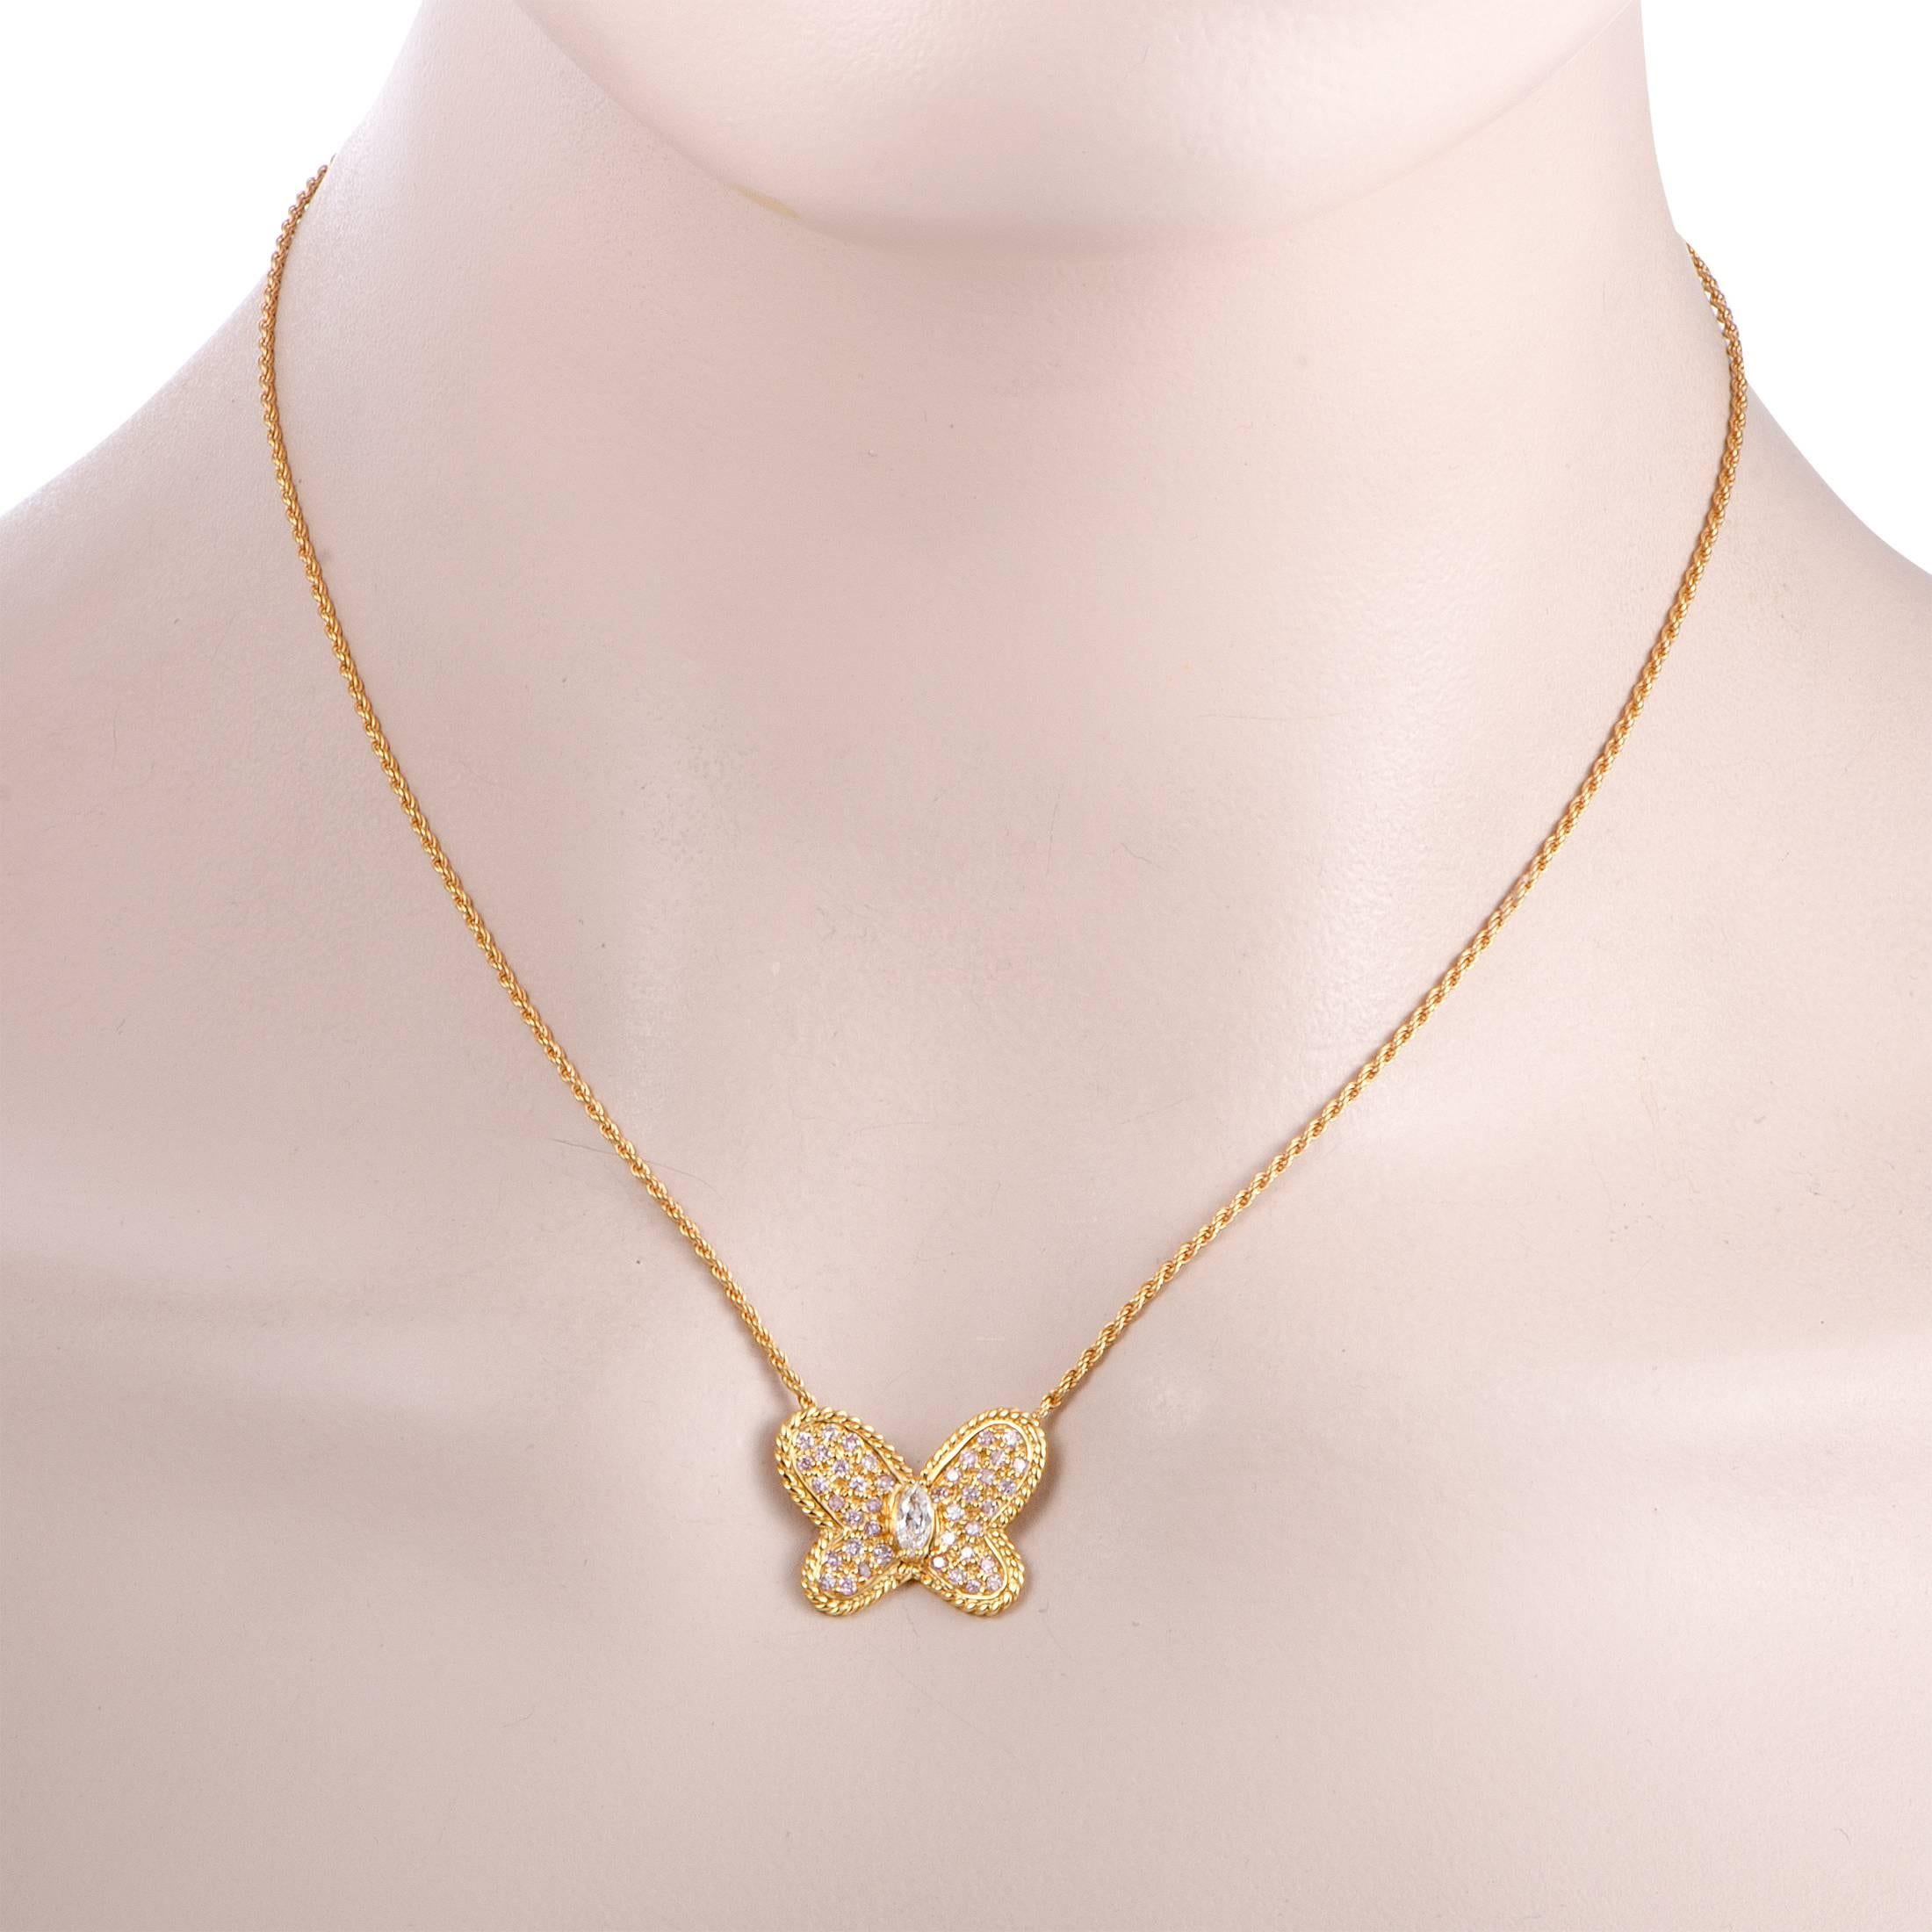 Featuring a delightful butterfly pendant that is beautifully embellished with dazzling diamonds, this lovely 18K yellow gold necklace from Graff offers an enchantingly feminine appearance. The pendant is set with 0.50 carats of pink diamonds, and a